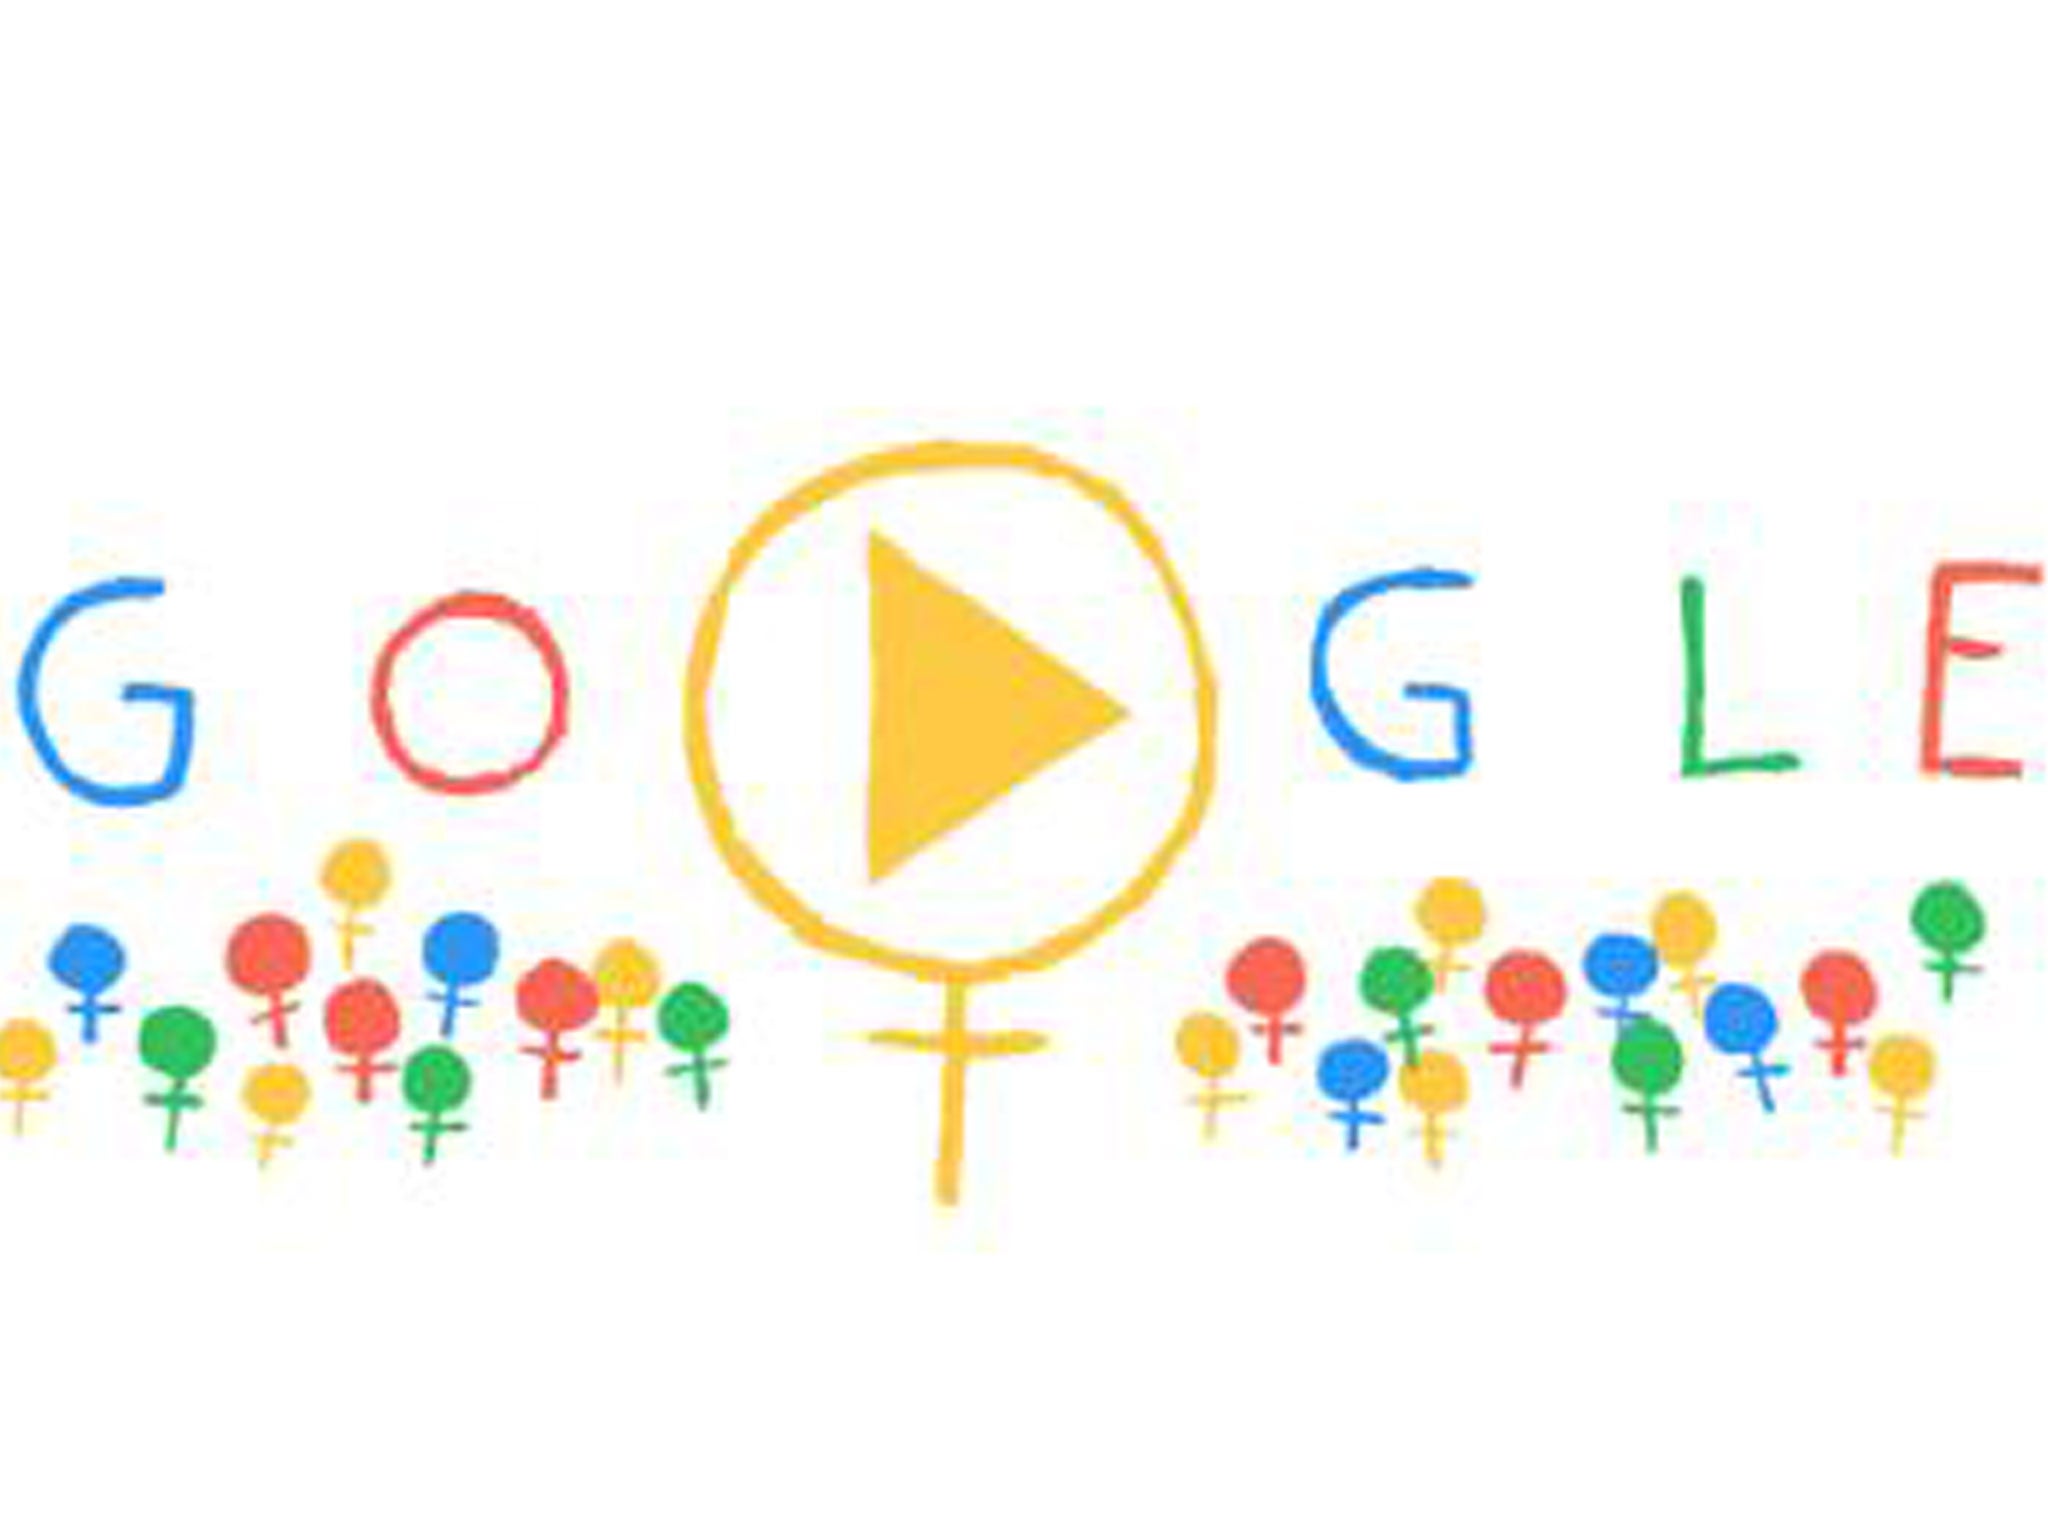 Google has marked International Women’s Day with an animated doodle using Venus symbols to represent every woman across the world.